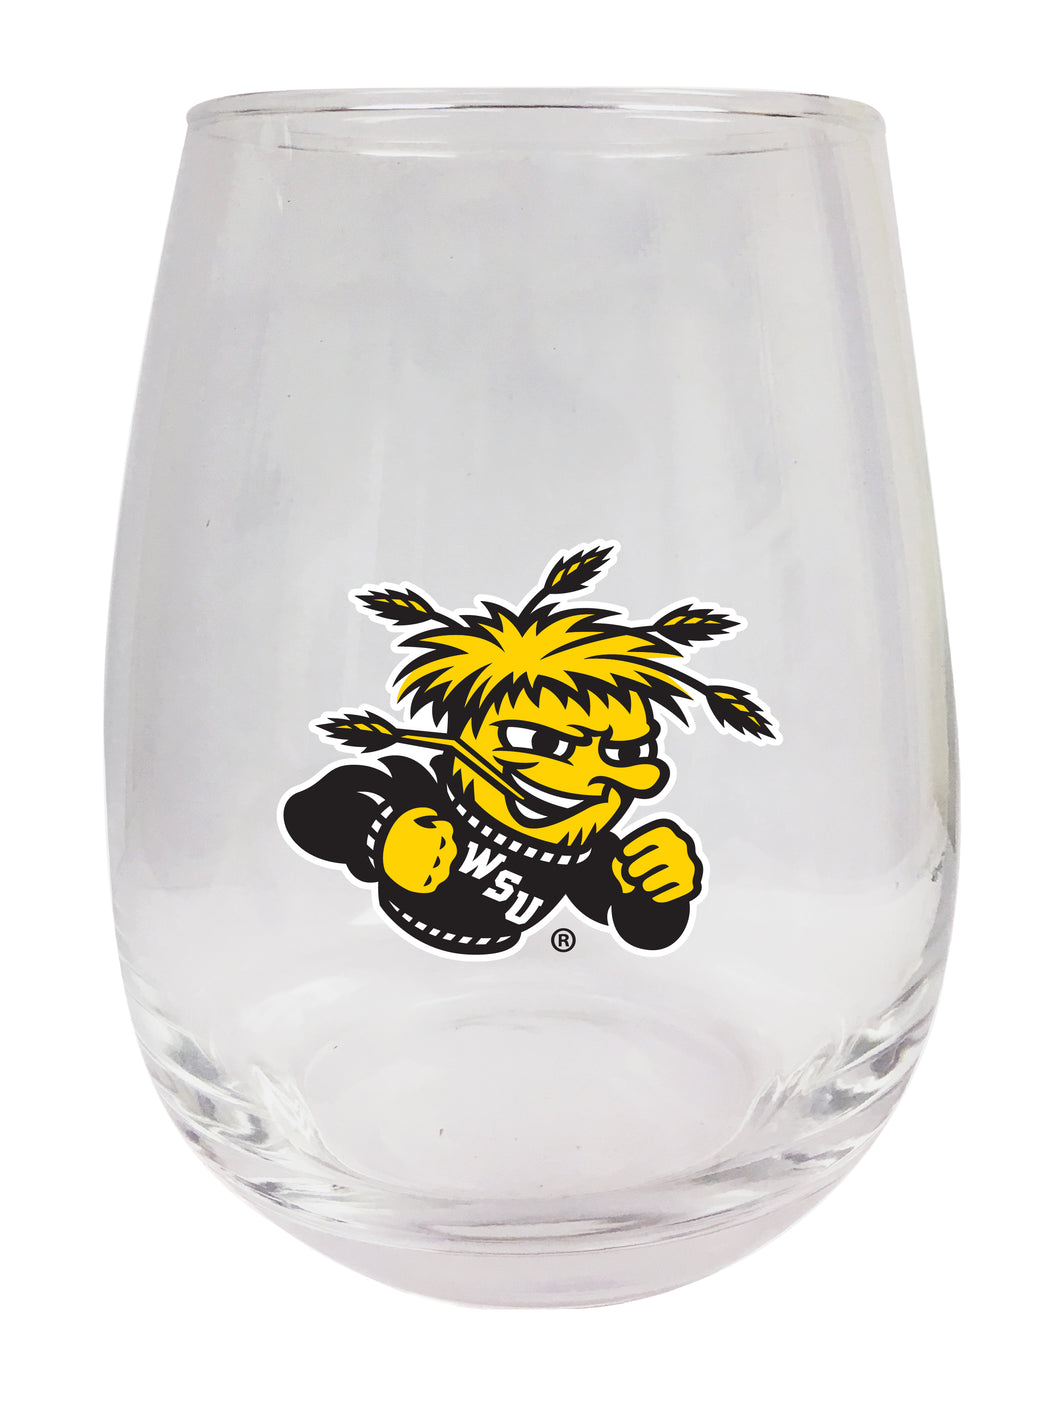 Wichita State Shockers Stemless Wine Glass - 9 oz. | Officially Licensed NCAA Merchandise